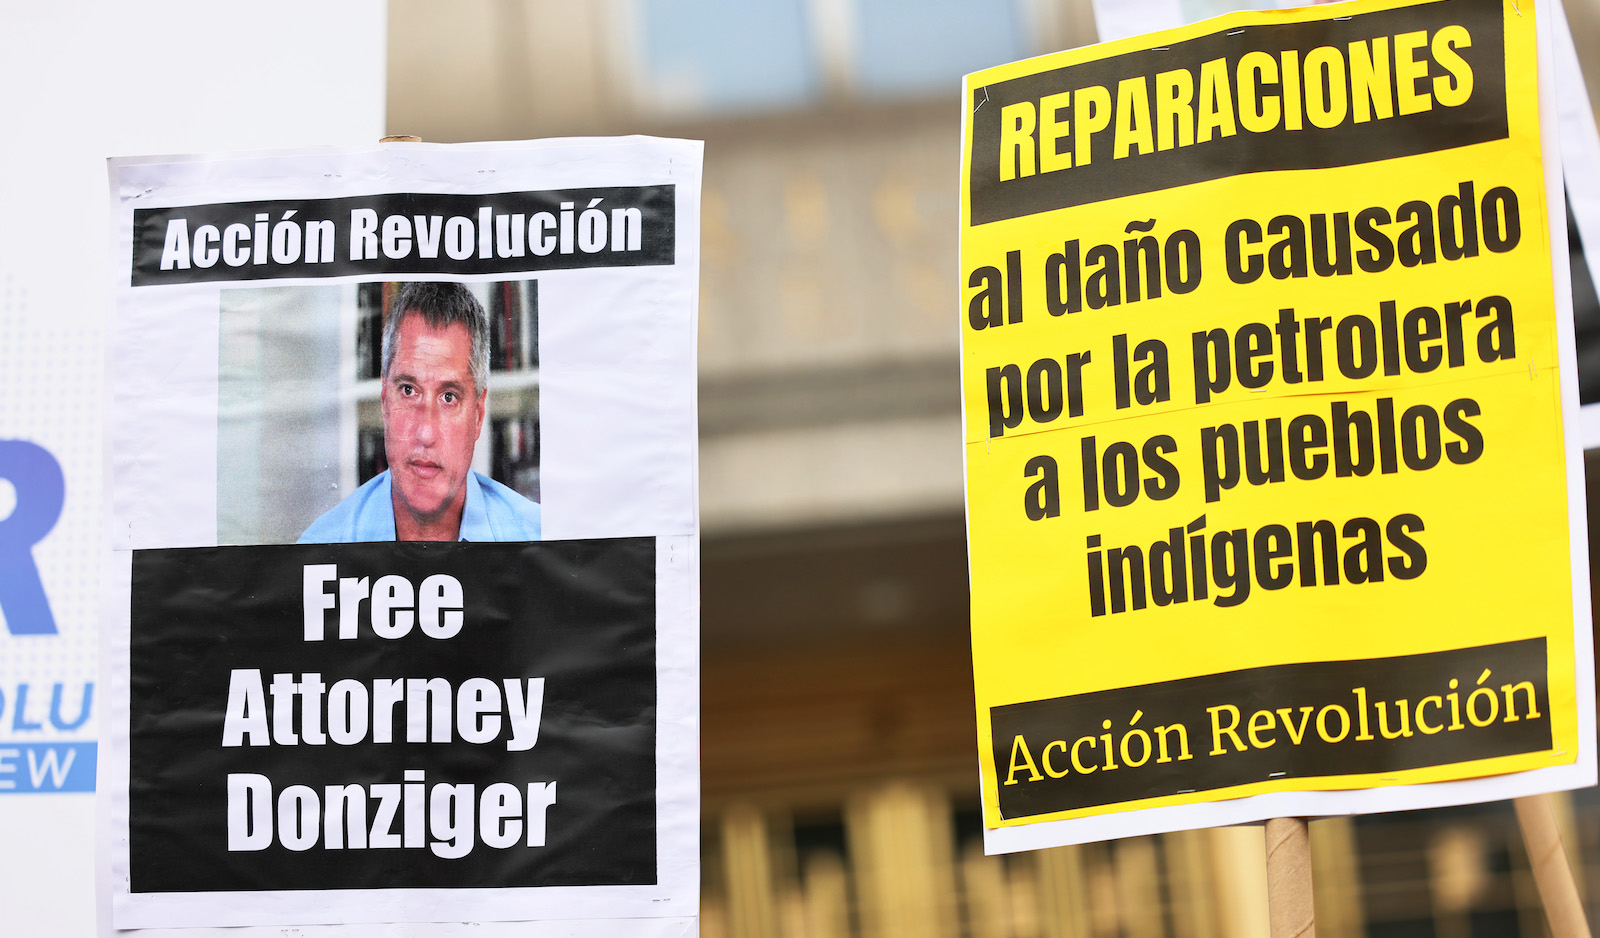 Posters call for the release of attorney Steven Donziger.